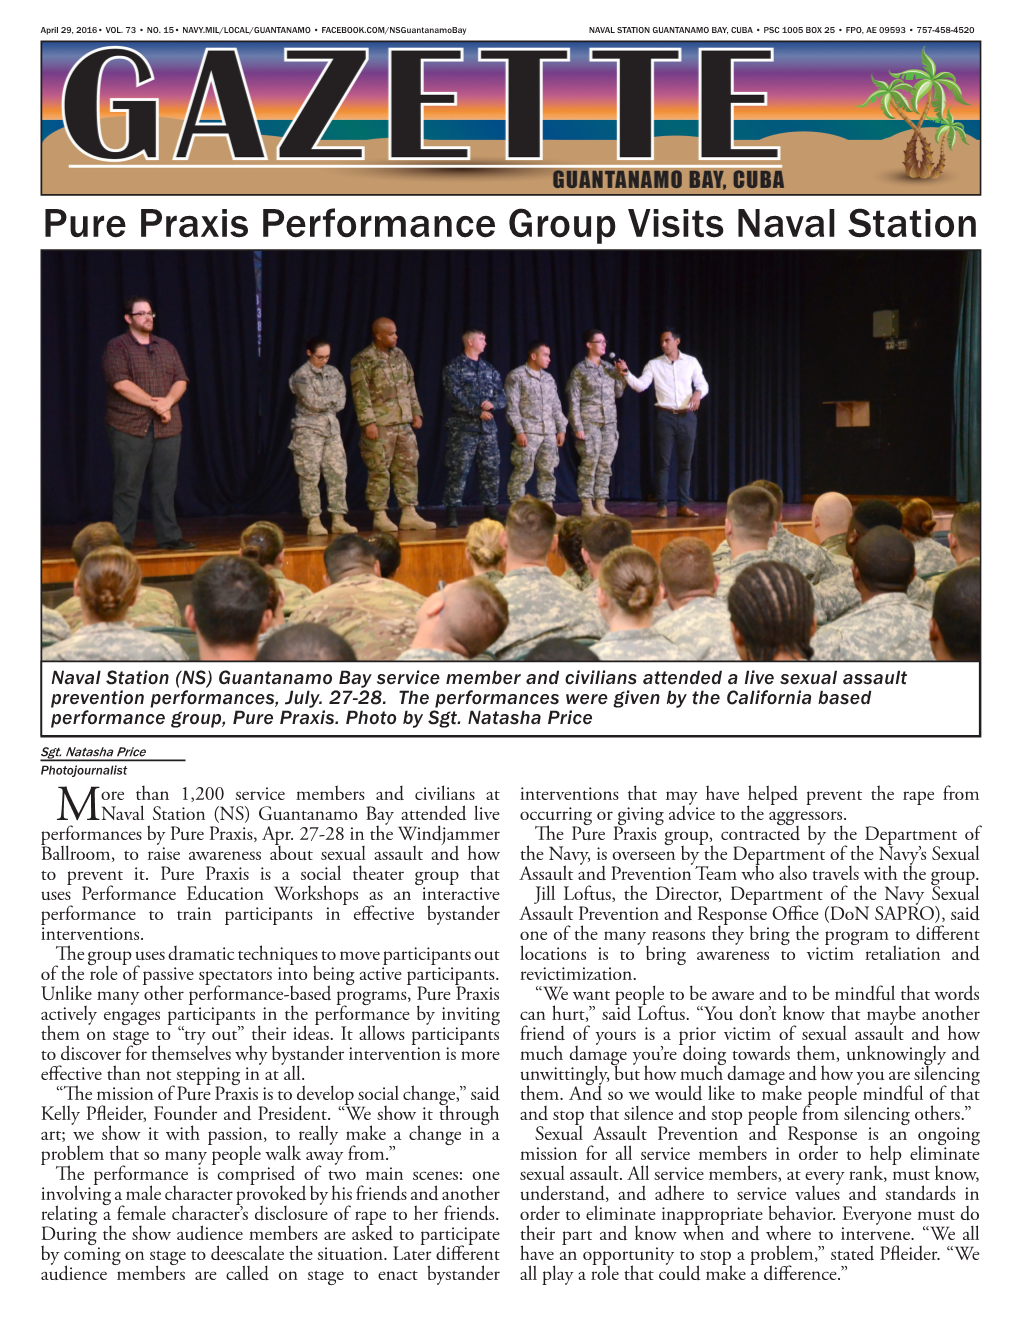 Pure Praxis Performance Group Visits Naval Station